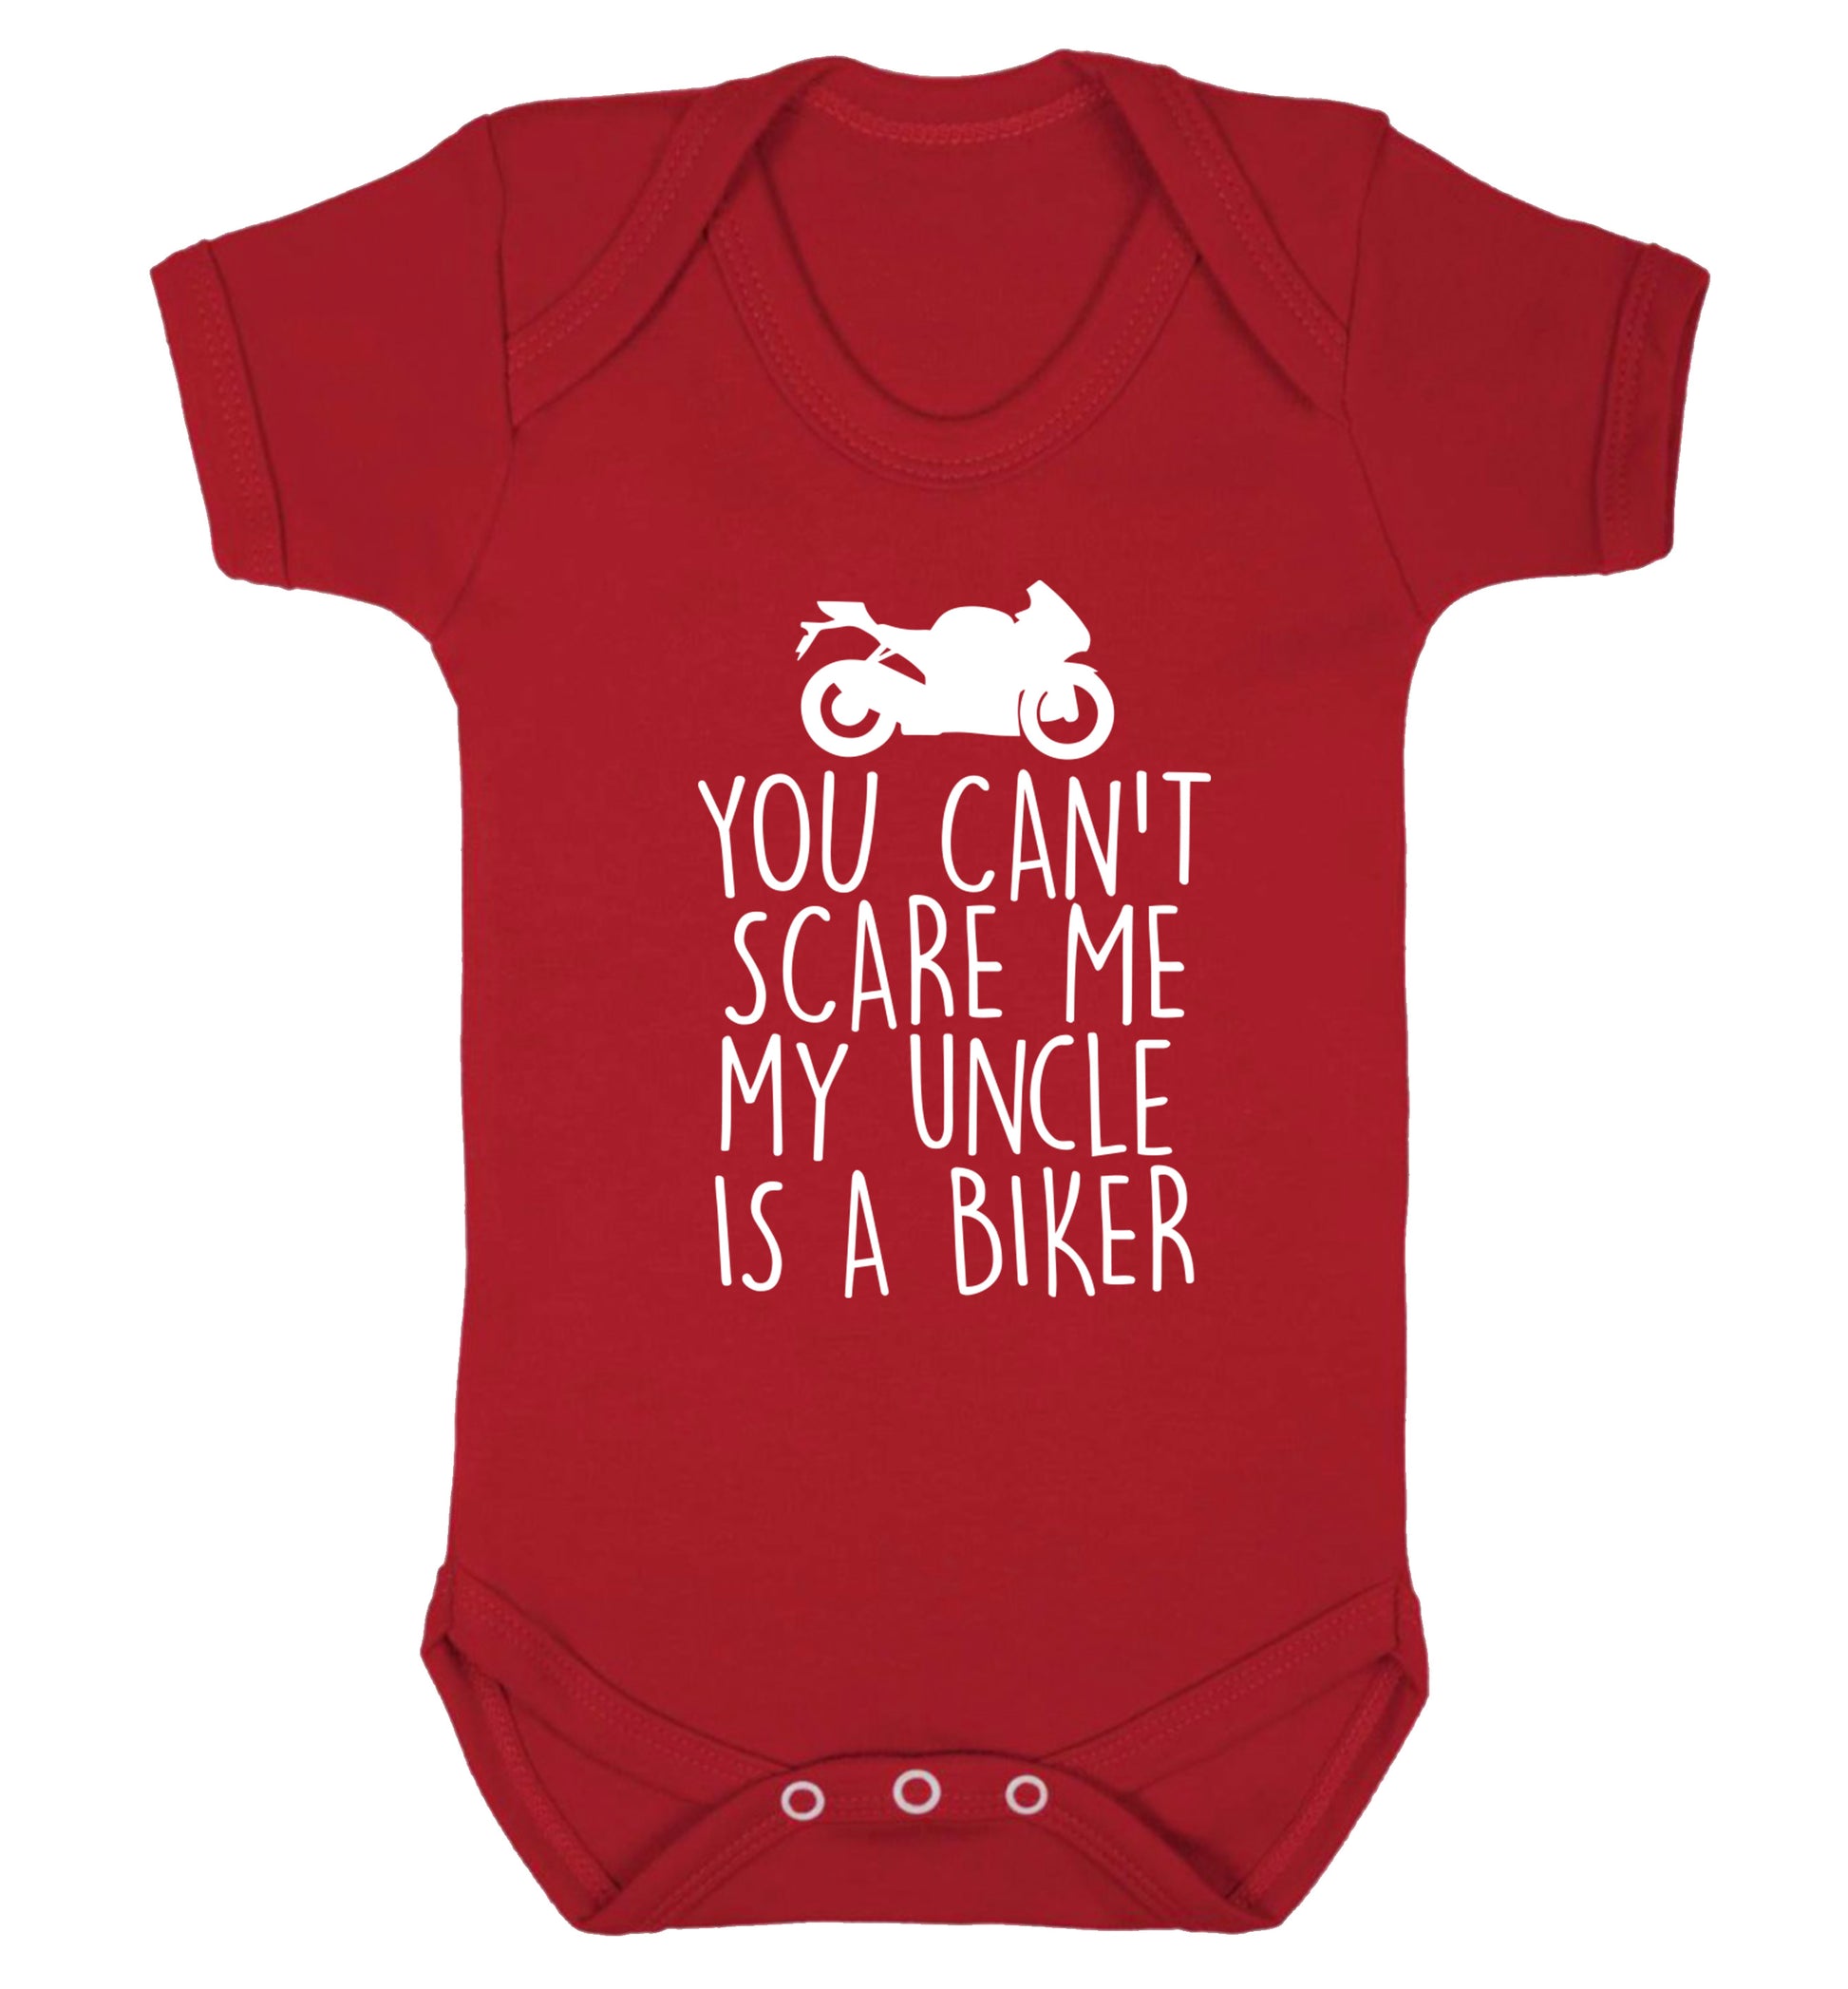 You can't scare me my uncle is a biker Baby Vest red 18-24 months